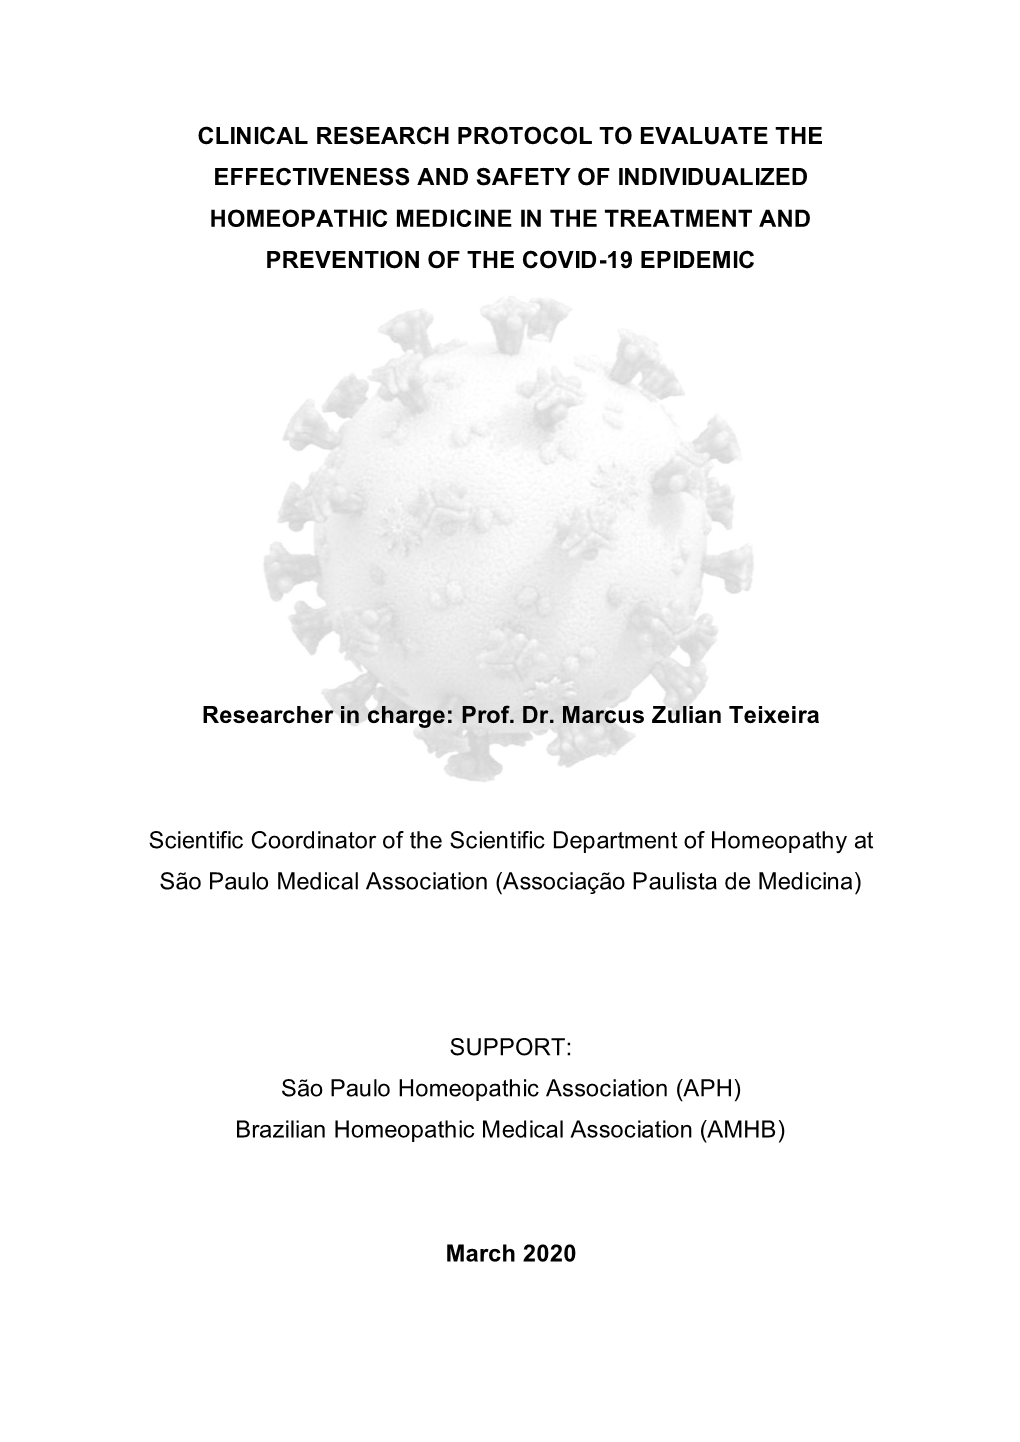 Clinical Research Protocol to Evaluate the Effectiveness and Safety of Individualized Homeopathic Medicine in the Treatment and Prevention of the Covid-19 Epidemic